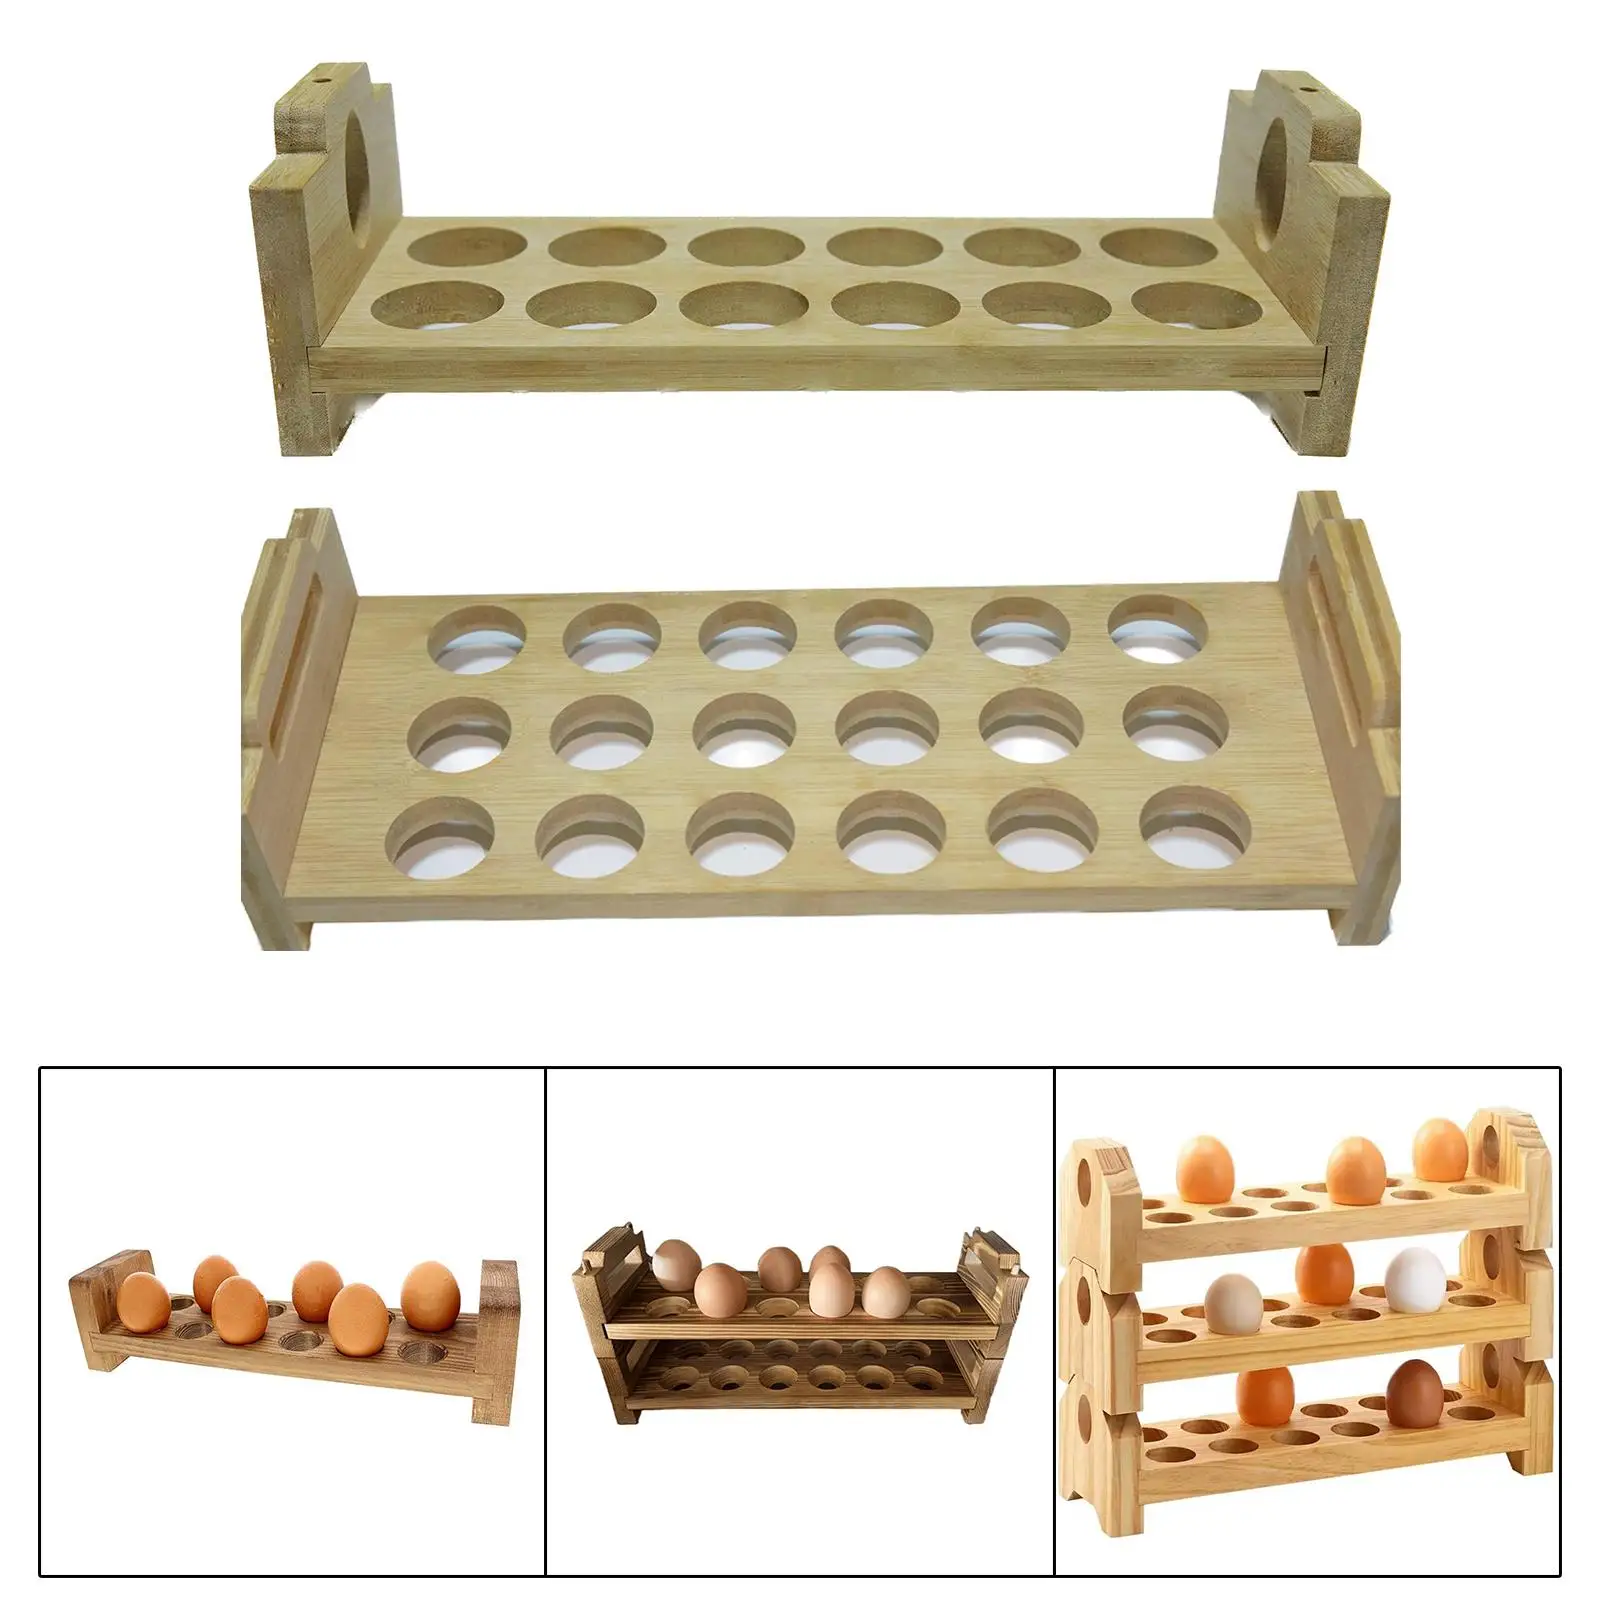 Egg Tray Counter Top Rustic Wooden Egg Holder Egg Container Rack for Kitchens Supermarket Refrigerator Pantry Necessities